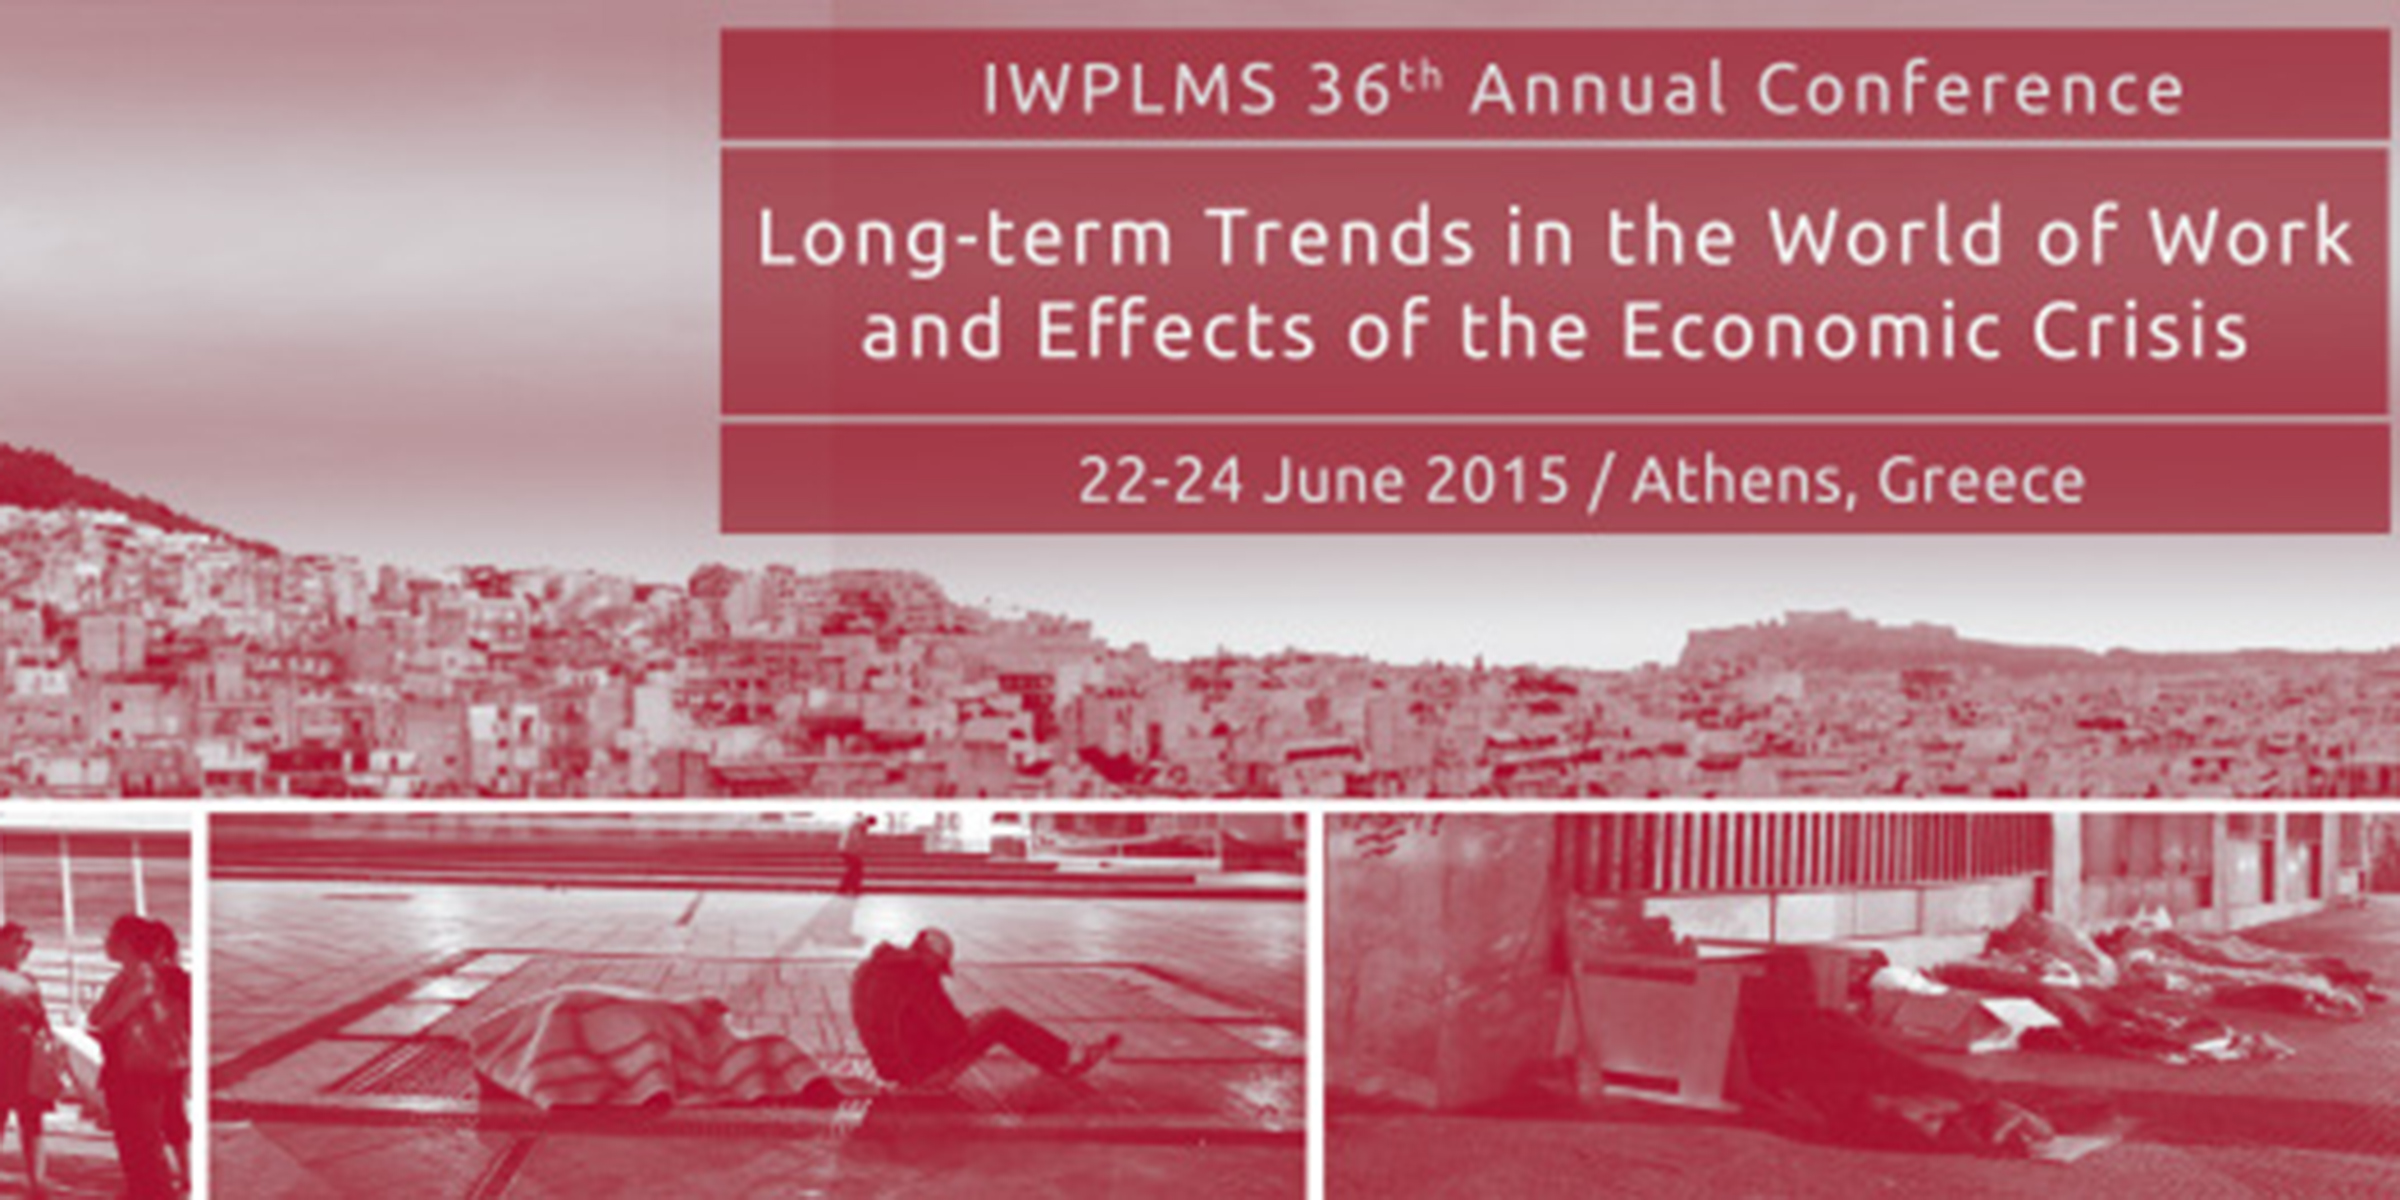 IWPLMS 36th annual conference poster